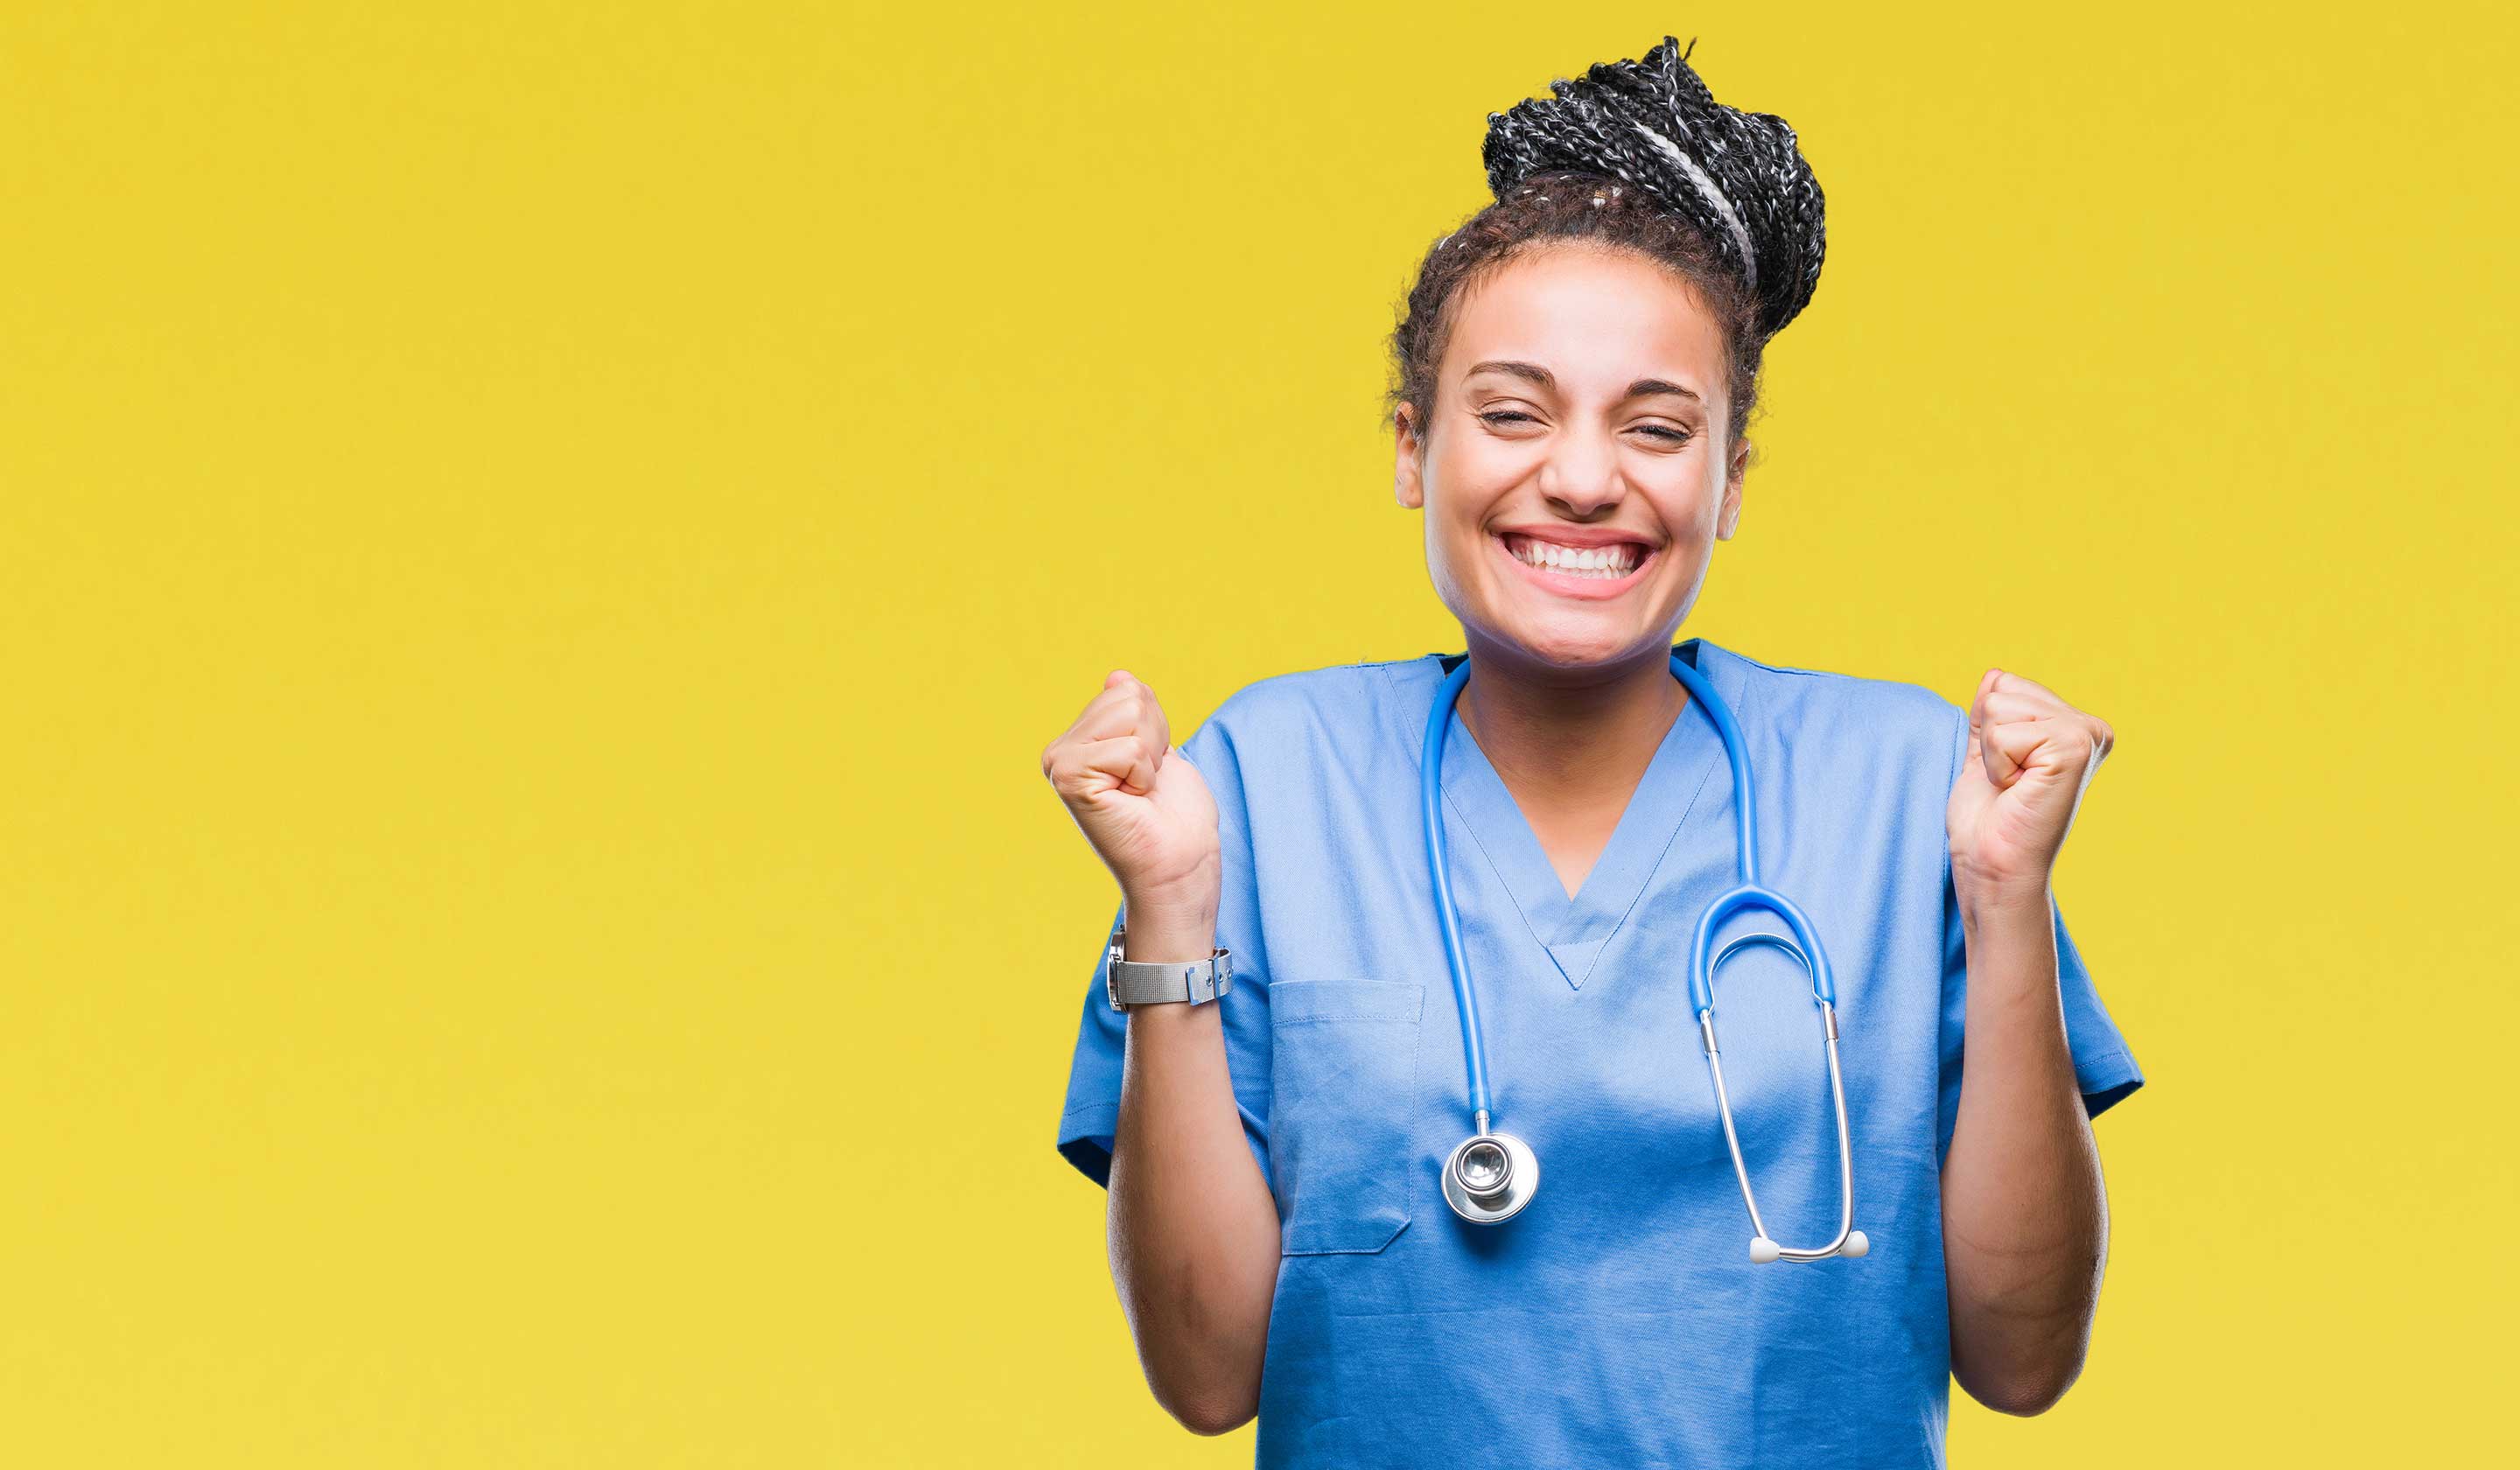 Top 3 Ways To Address Nursing Shortages For a Happier Workplace | BetterRX